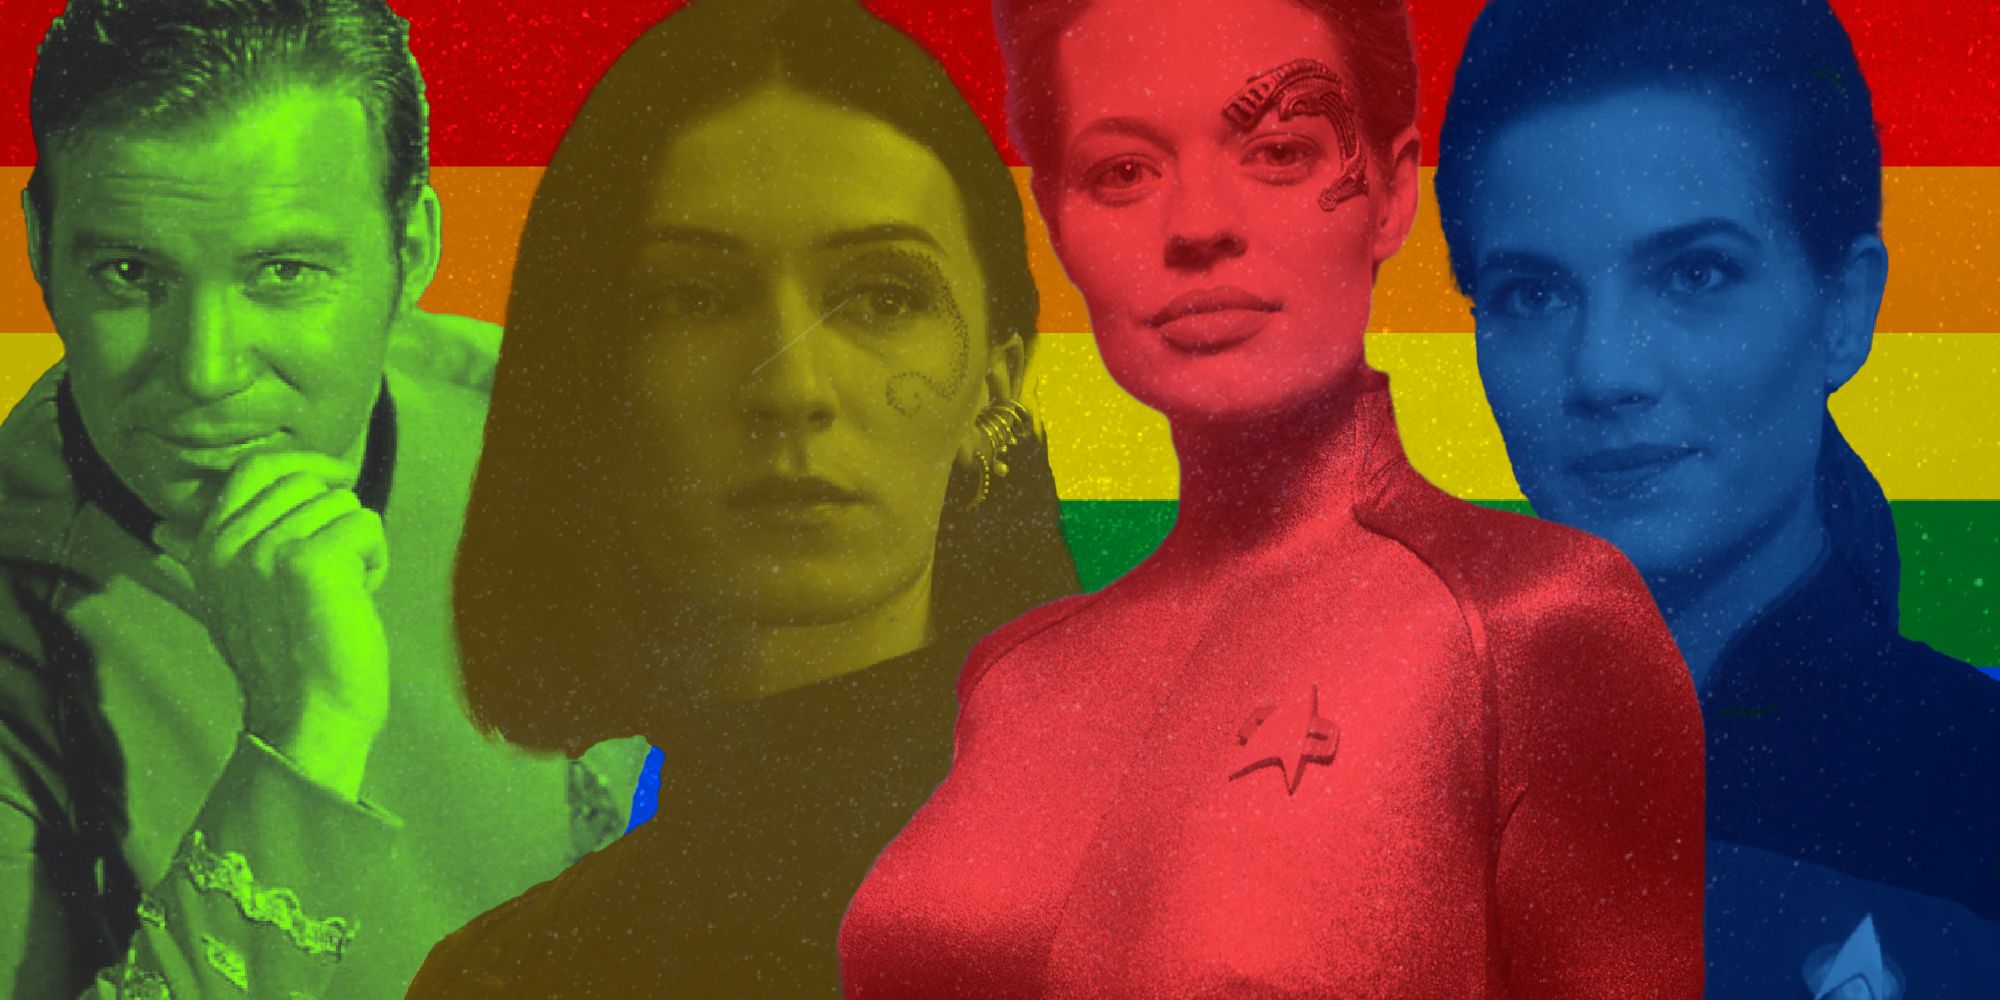 A rainbow background with four Star Trek characters. From left to right: Captain Kirk, Captain Angel, Seven of Nine, and Jadzia Dax